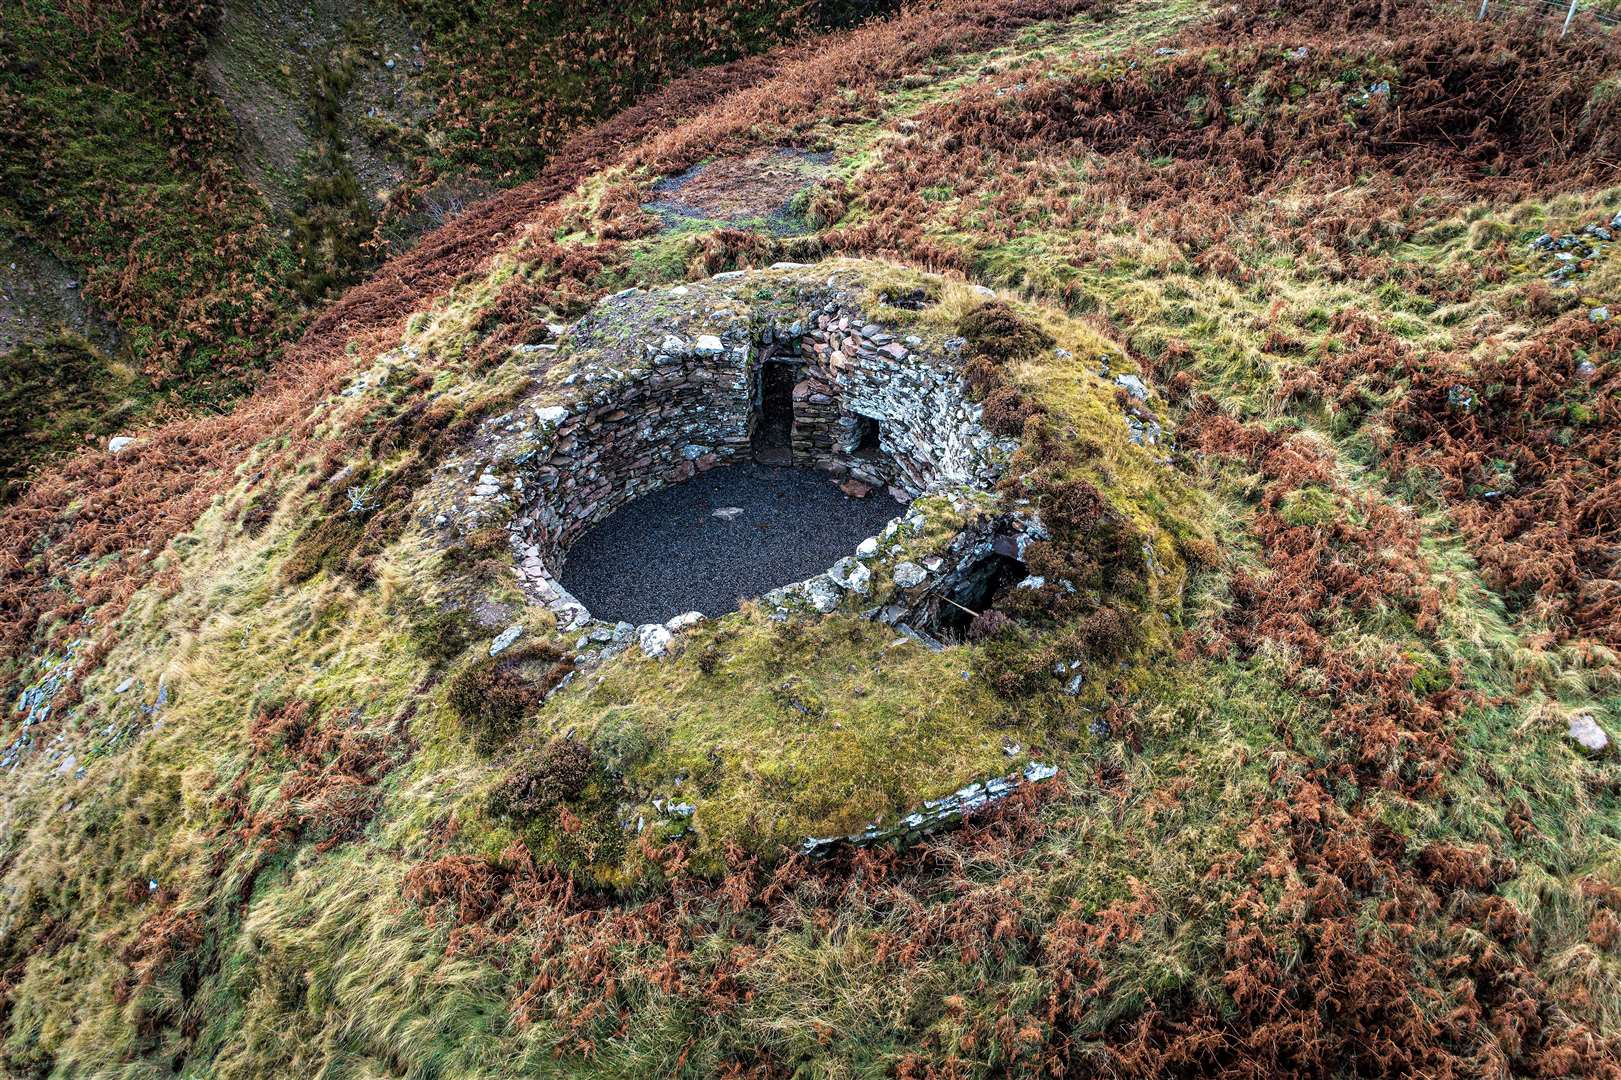 Ousdale broch after access and conservation improvements were carried out by the Caithness Broch Project team. Picture: Angus Mackay